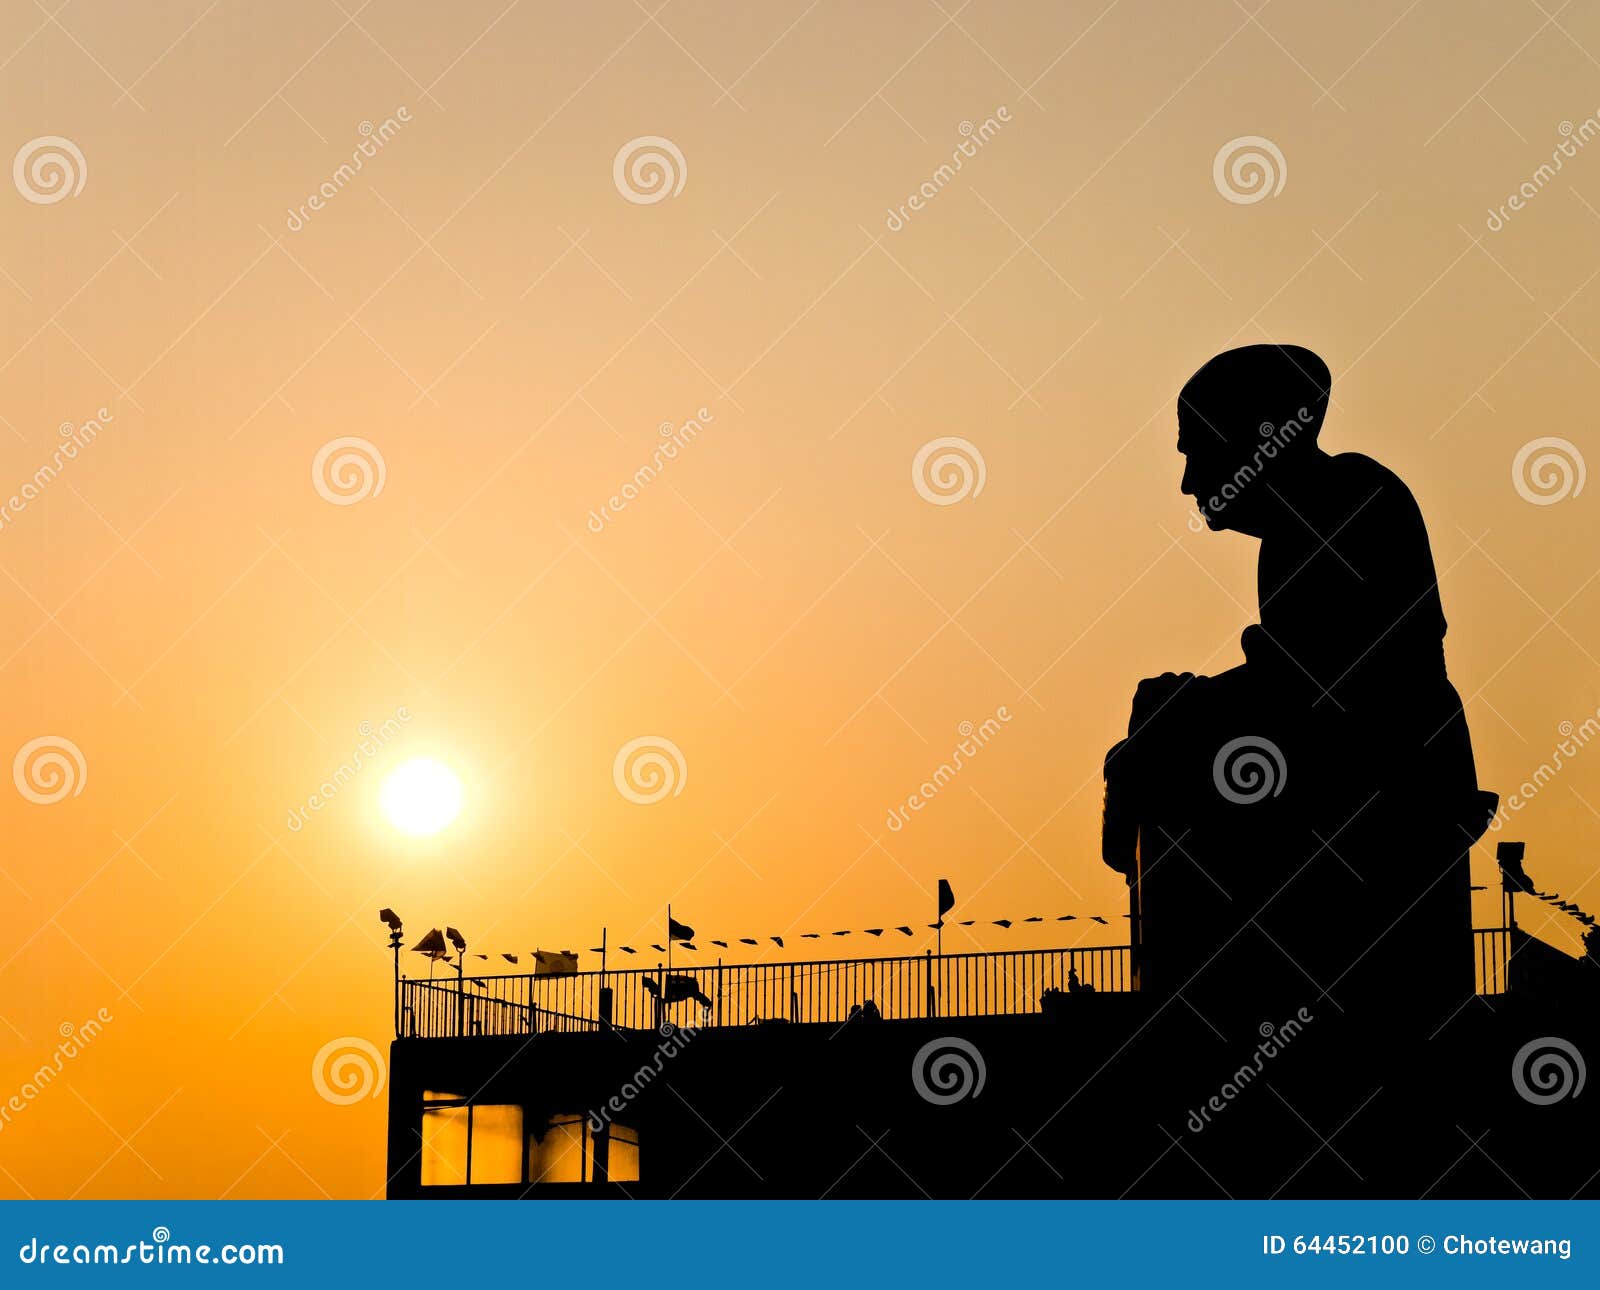 Buddhist monk statue silhouetted. Silhouette view of Buddhist monk statue with twilight sun